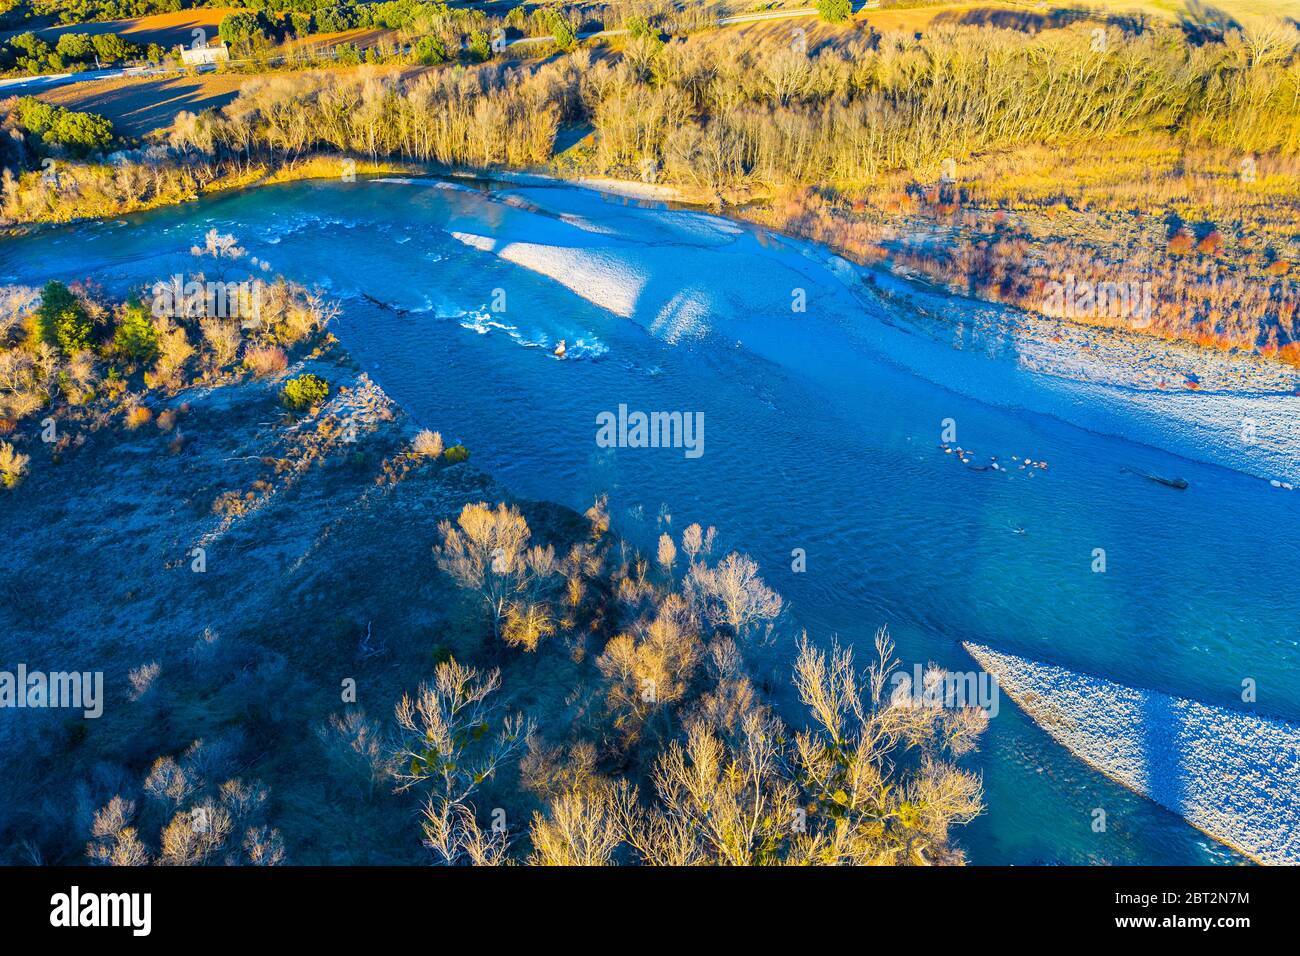 Riverbed in a natural landscape Stock Photo - Alamy